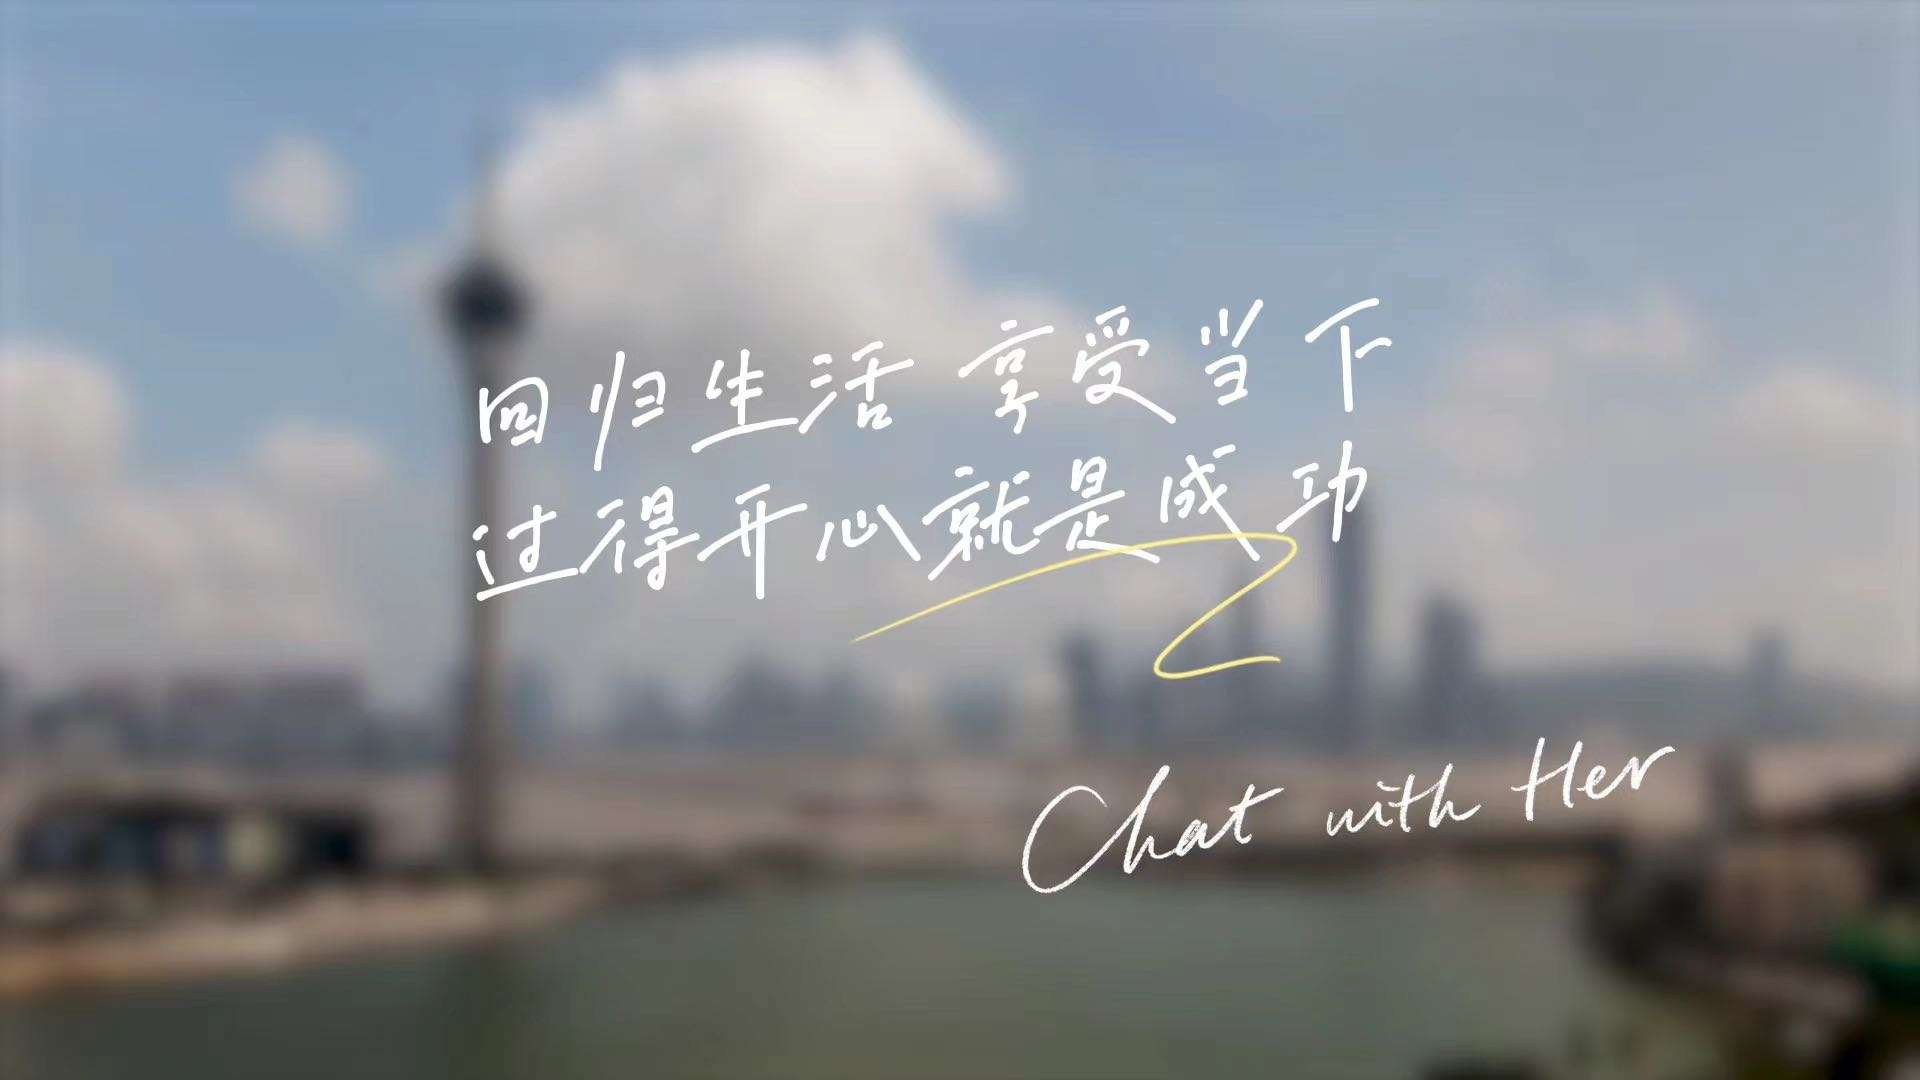 Chat with her: 奥运冠军变身金融白领？| OUOFILMS